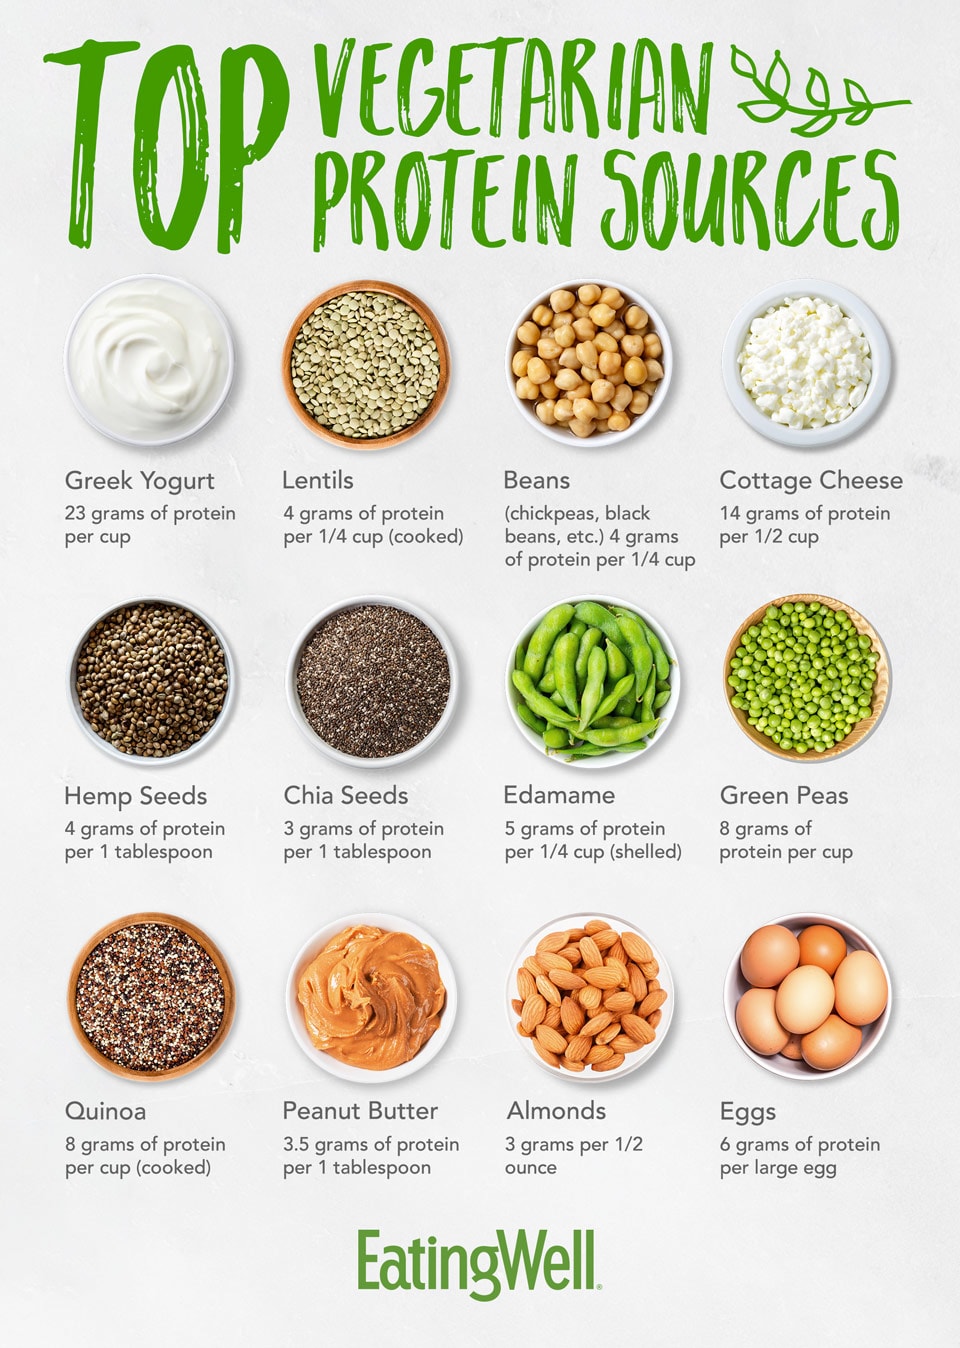 Vegeterian Protein Sources Infographic